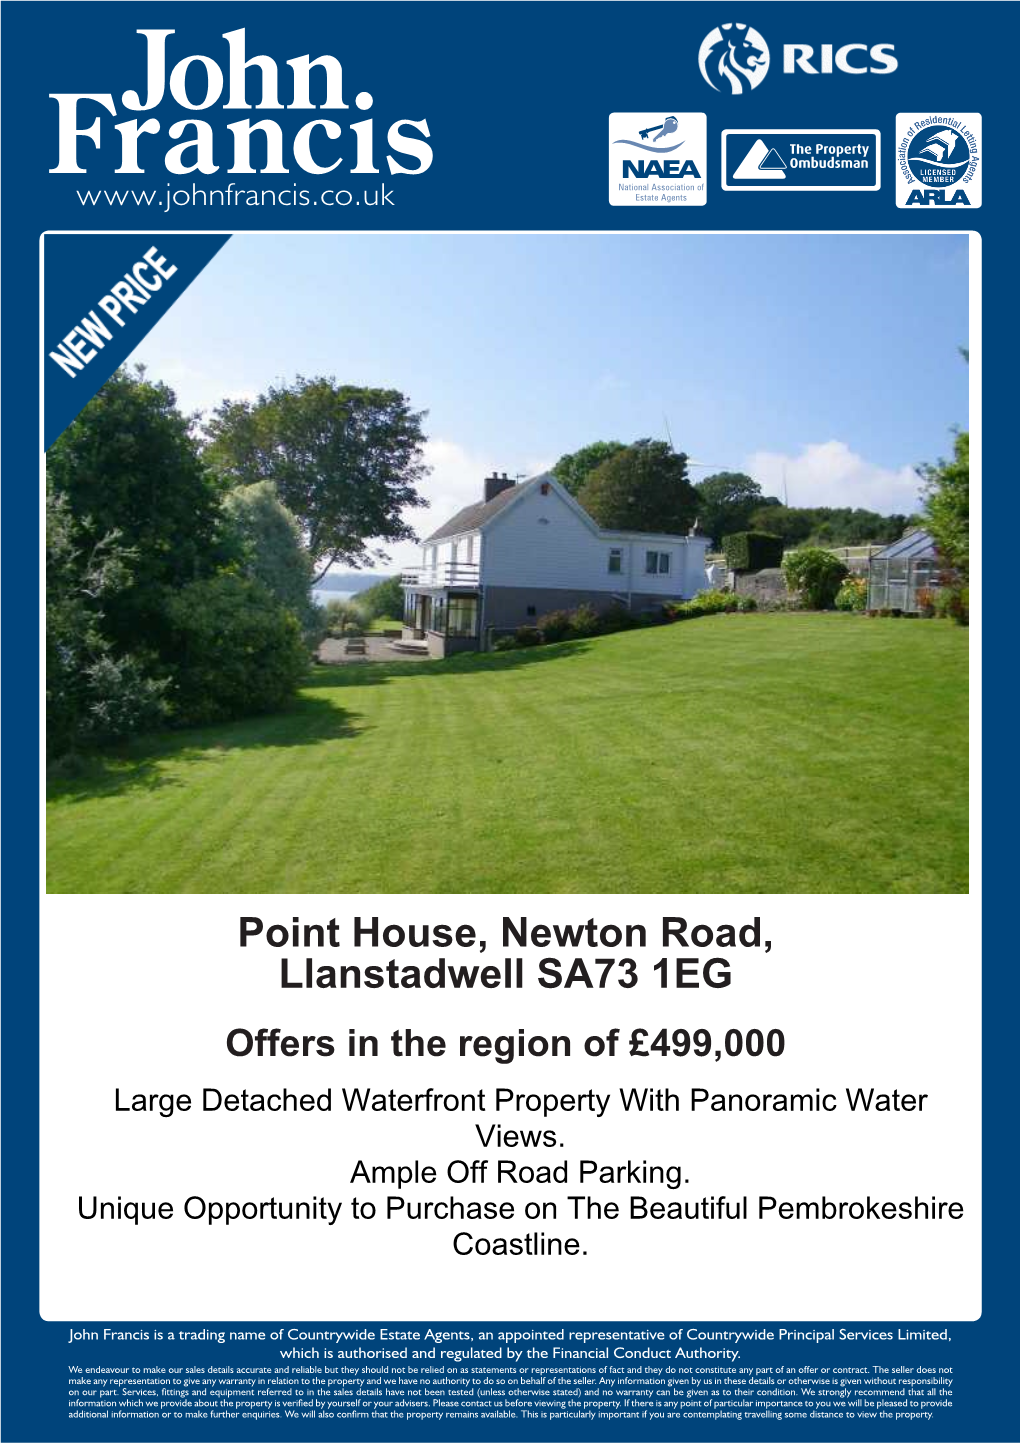 Point House, Newton Road, Llanstadwell SA73 1EG Offers in the Region of £499,000 • Large Detached Waterfront Property with Panoramic Water Views